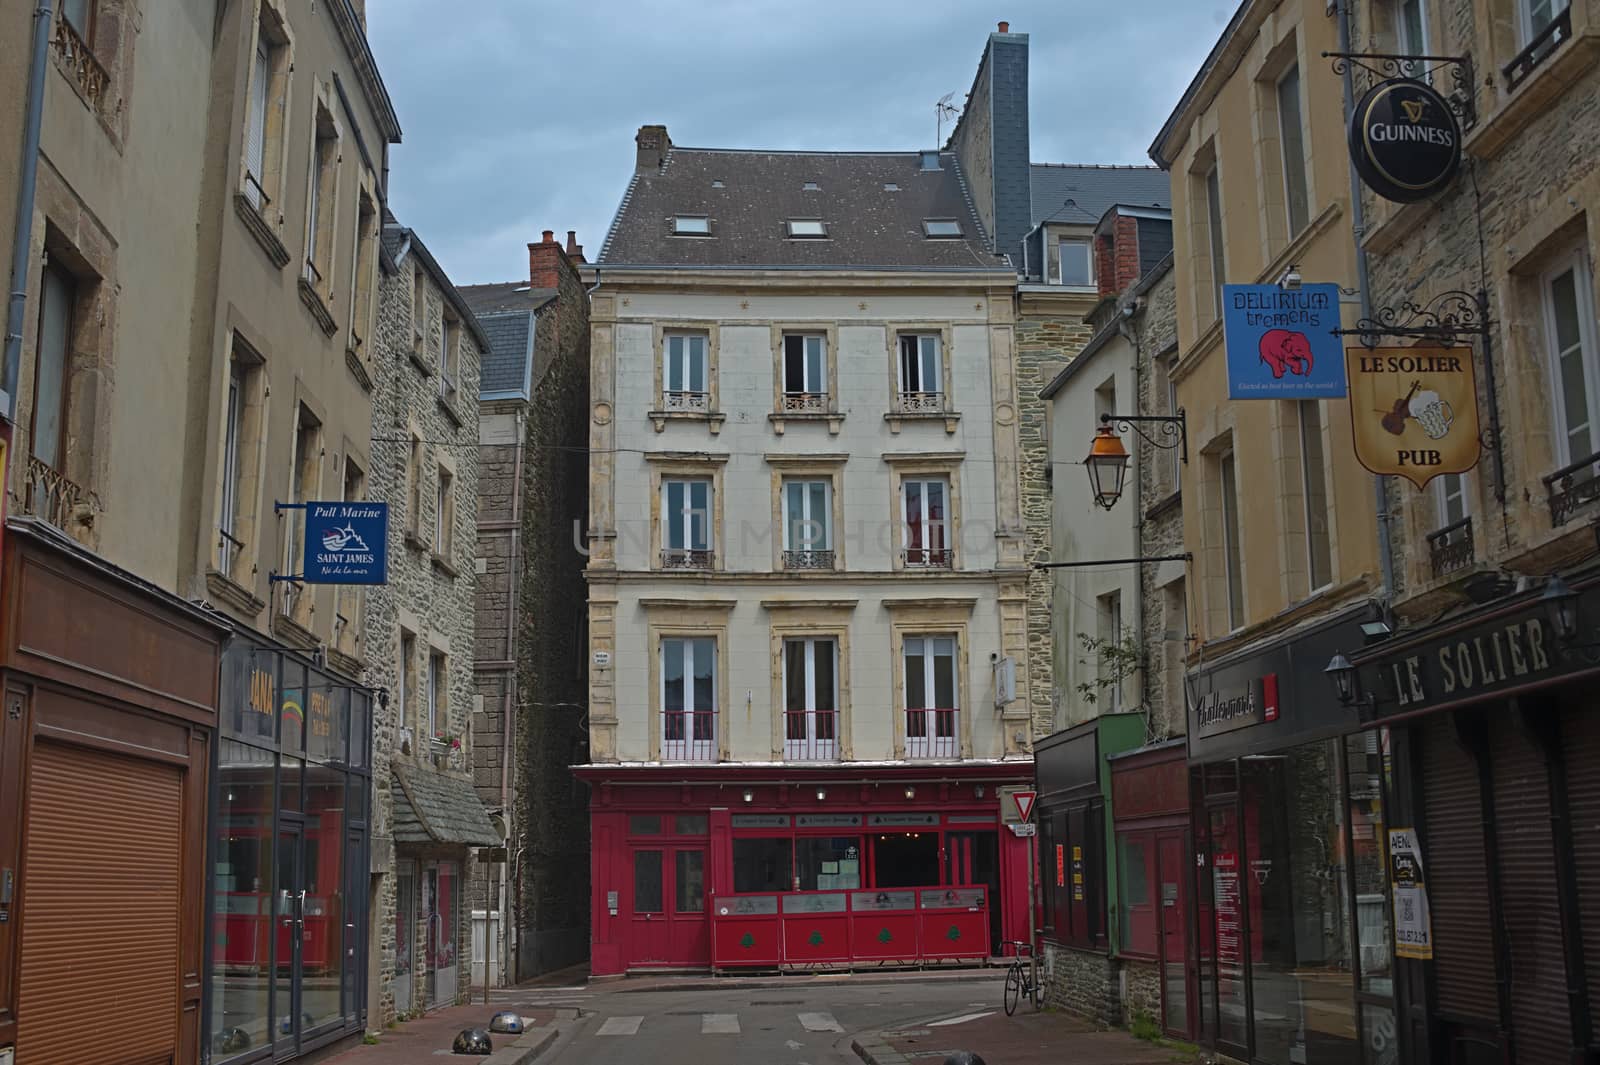 CHERBOURG, FRANCE - June 6th 2019 - Empty street with stone building in traditional town